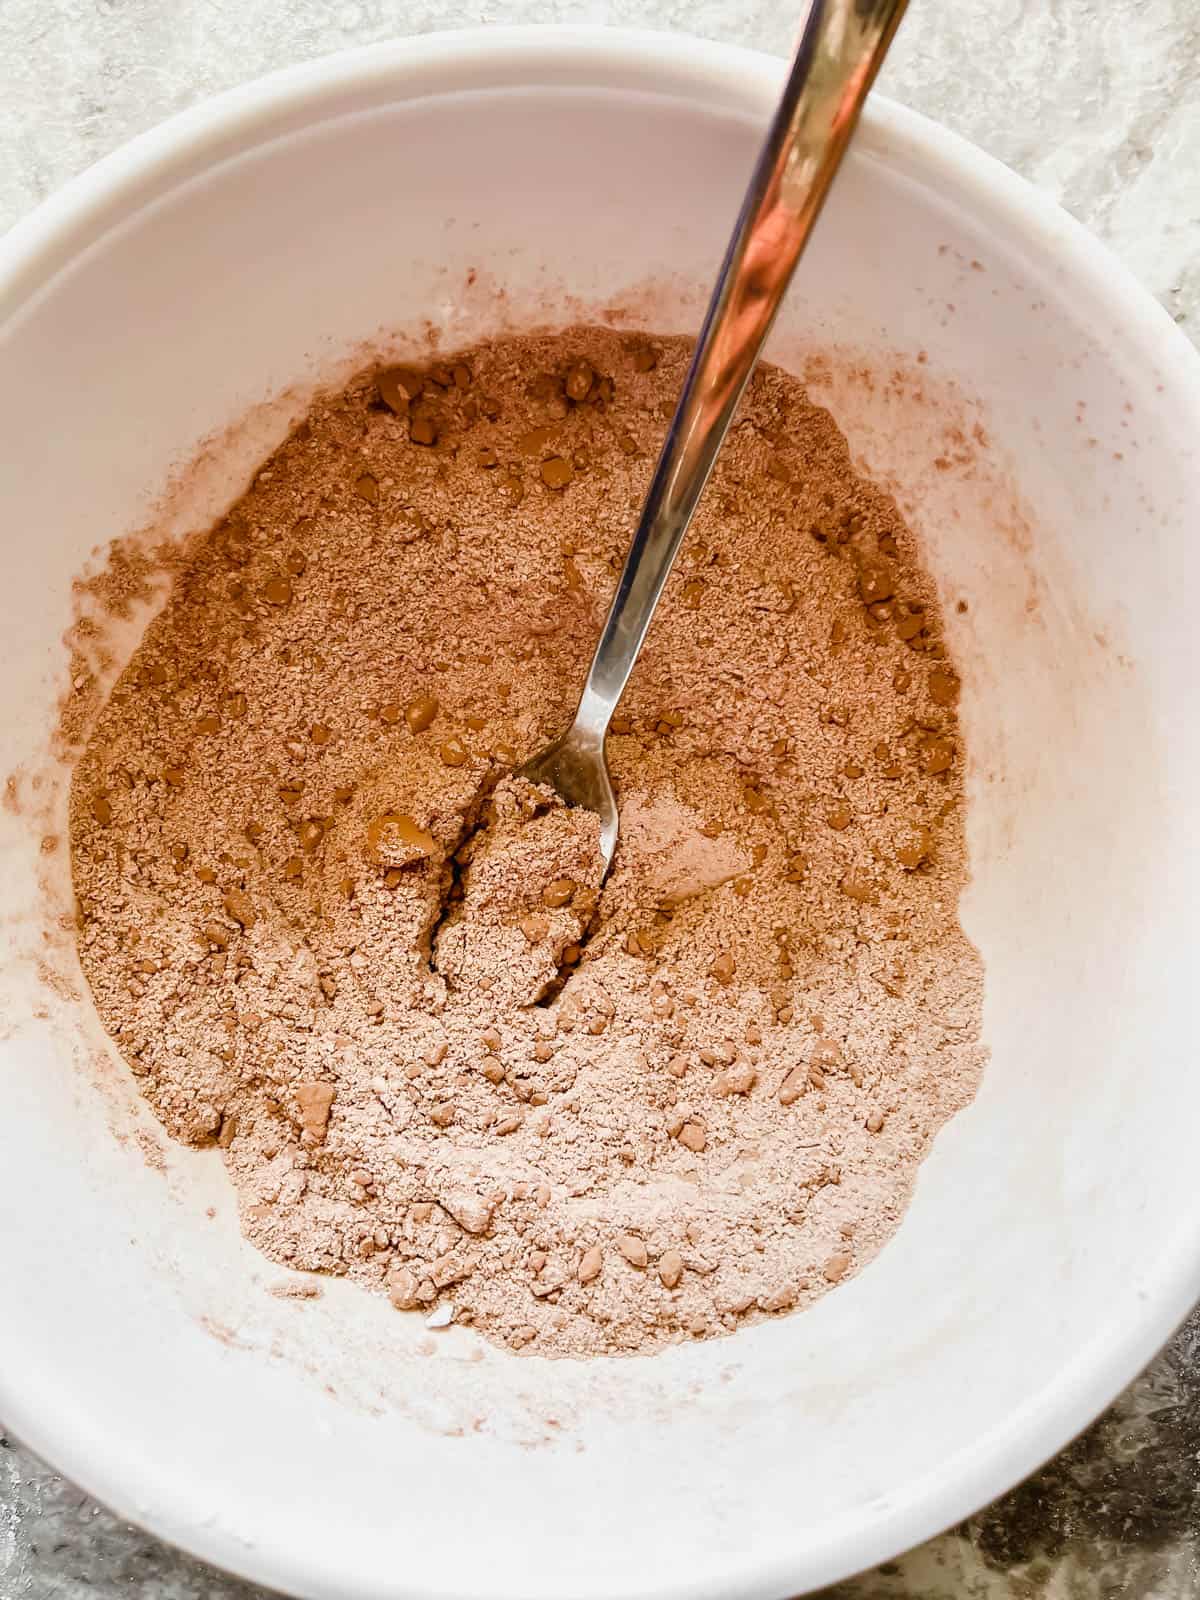 Dry ingredients mixed together.